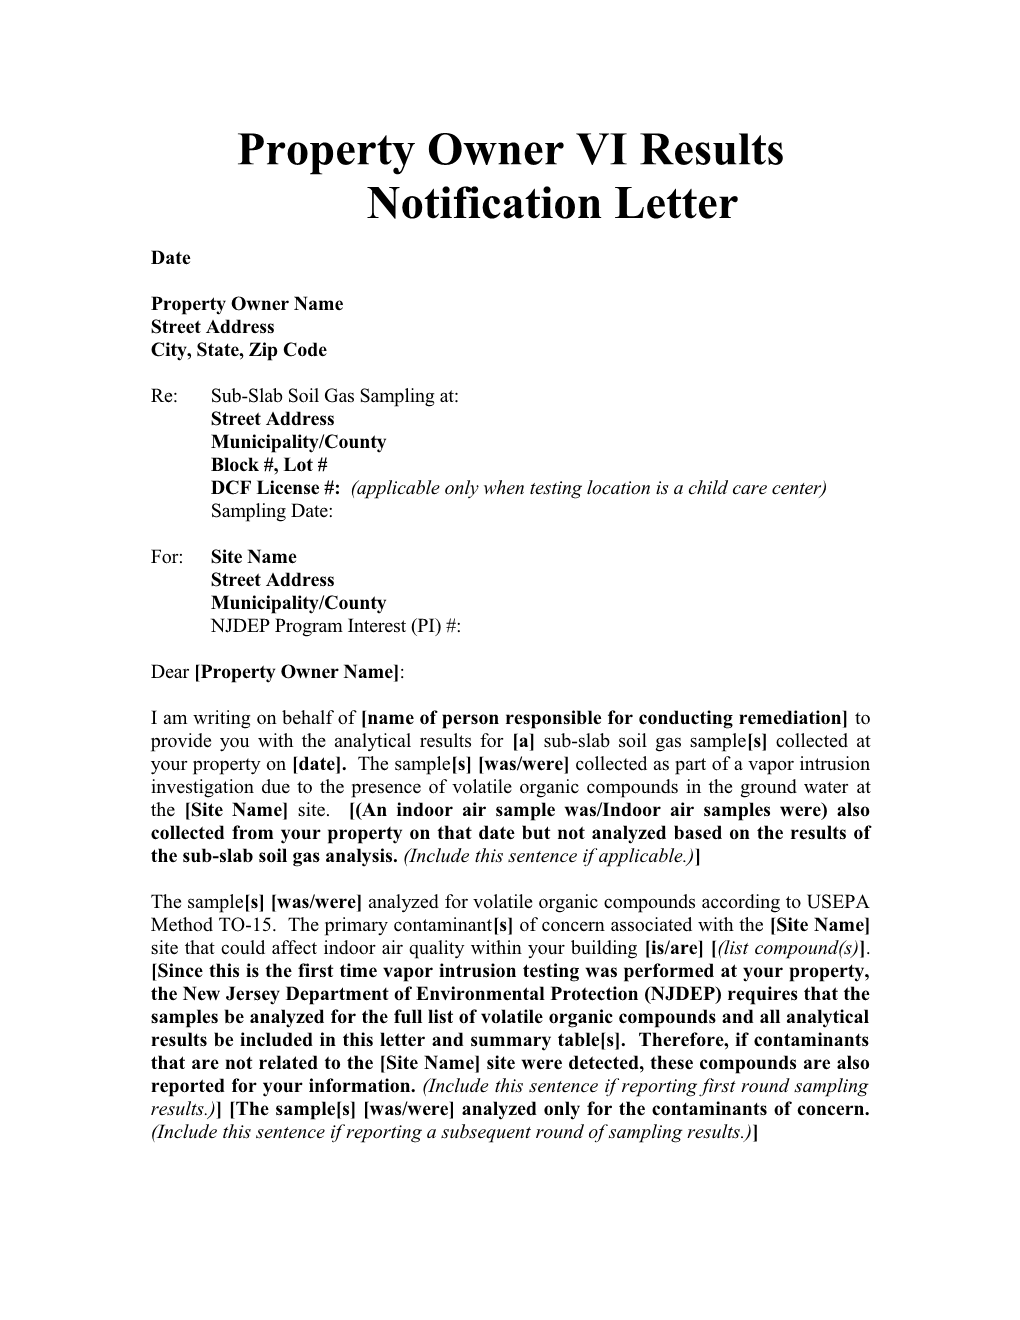 Property Owner VI Results Notification Letter